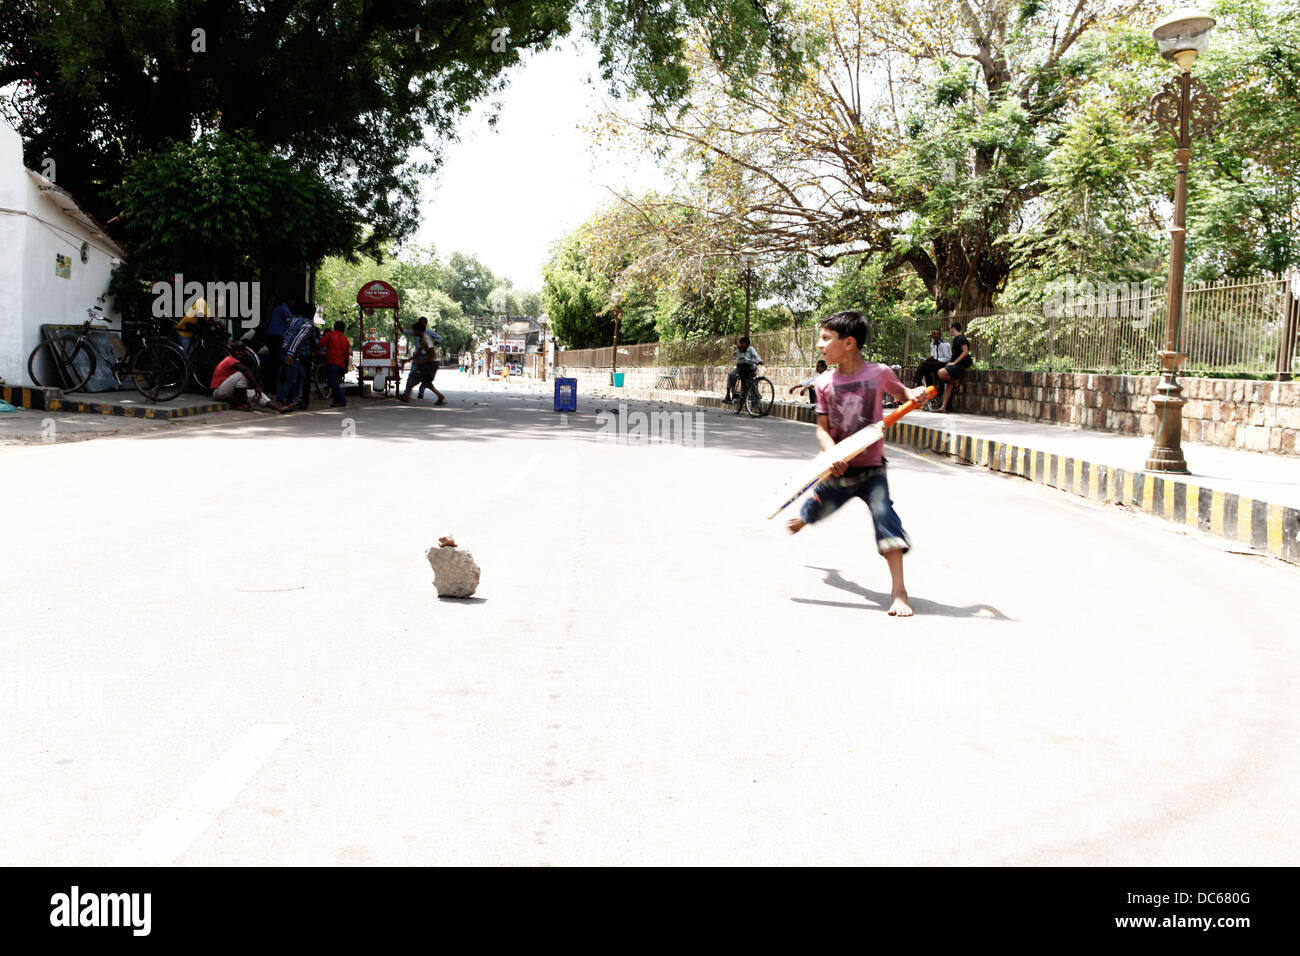 A young Indian boy runs a quick single during a game of street cricket in Khajuraho, India. Stock Photo